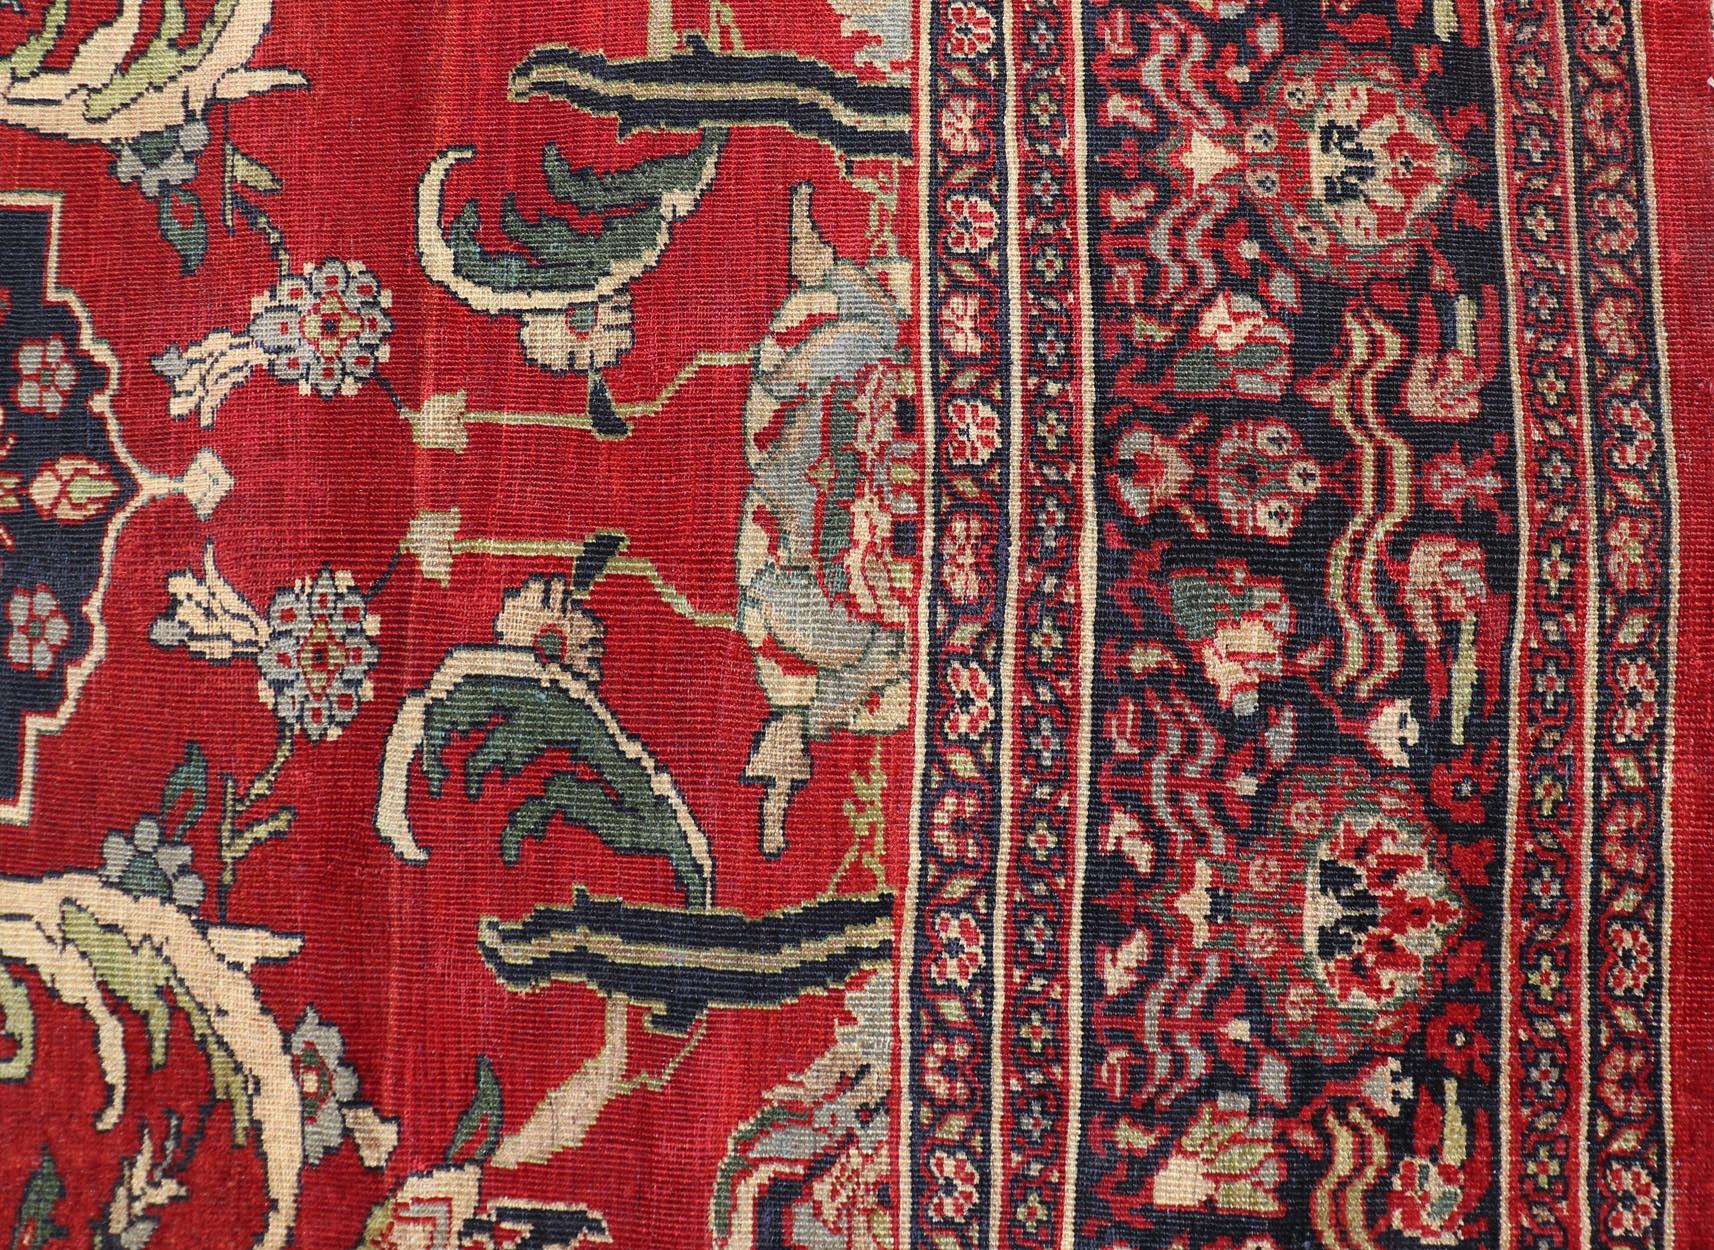 Antique Persian Zeigler Sultanabad Rug with Botanical Elements Set on Red Field For Sale 4